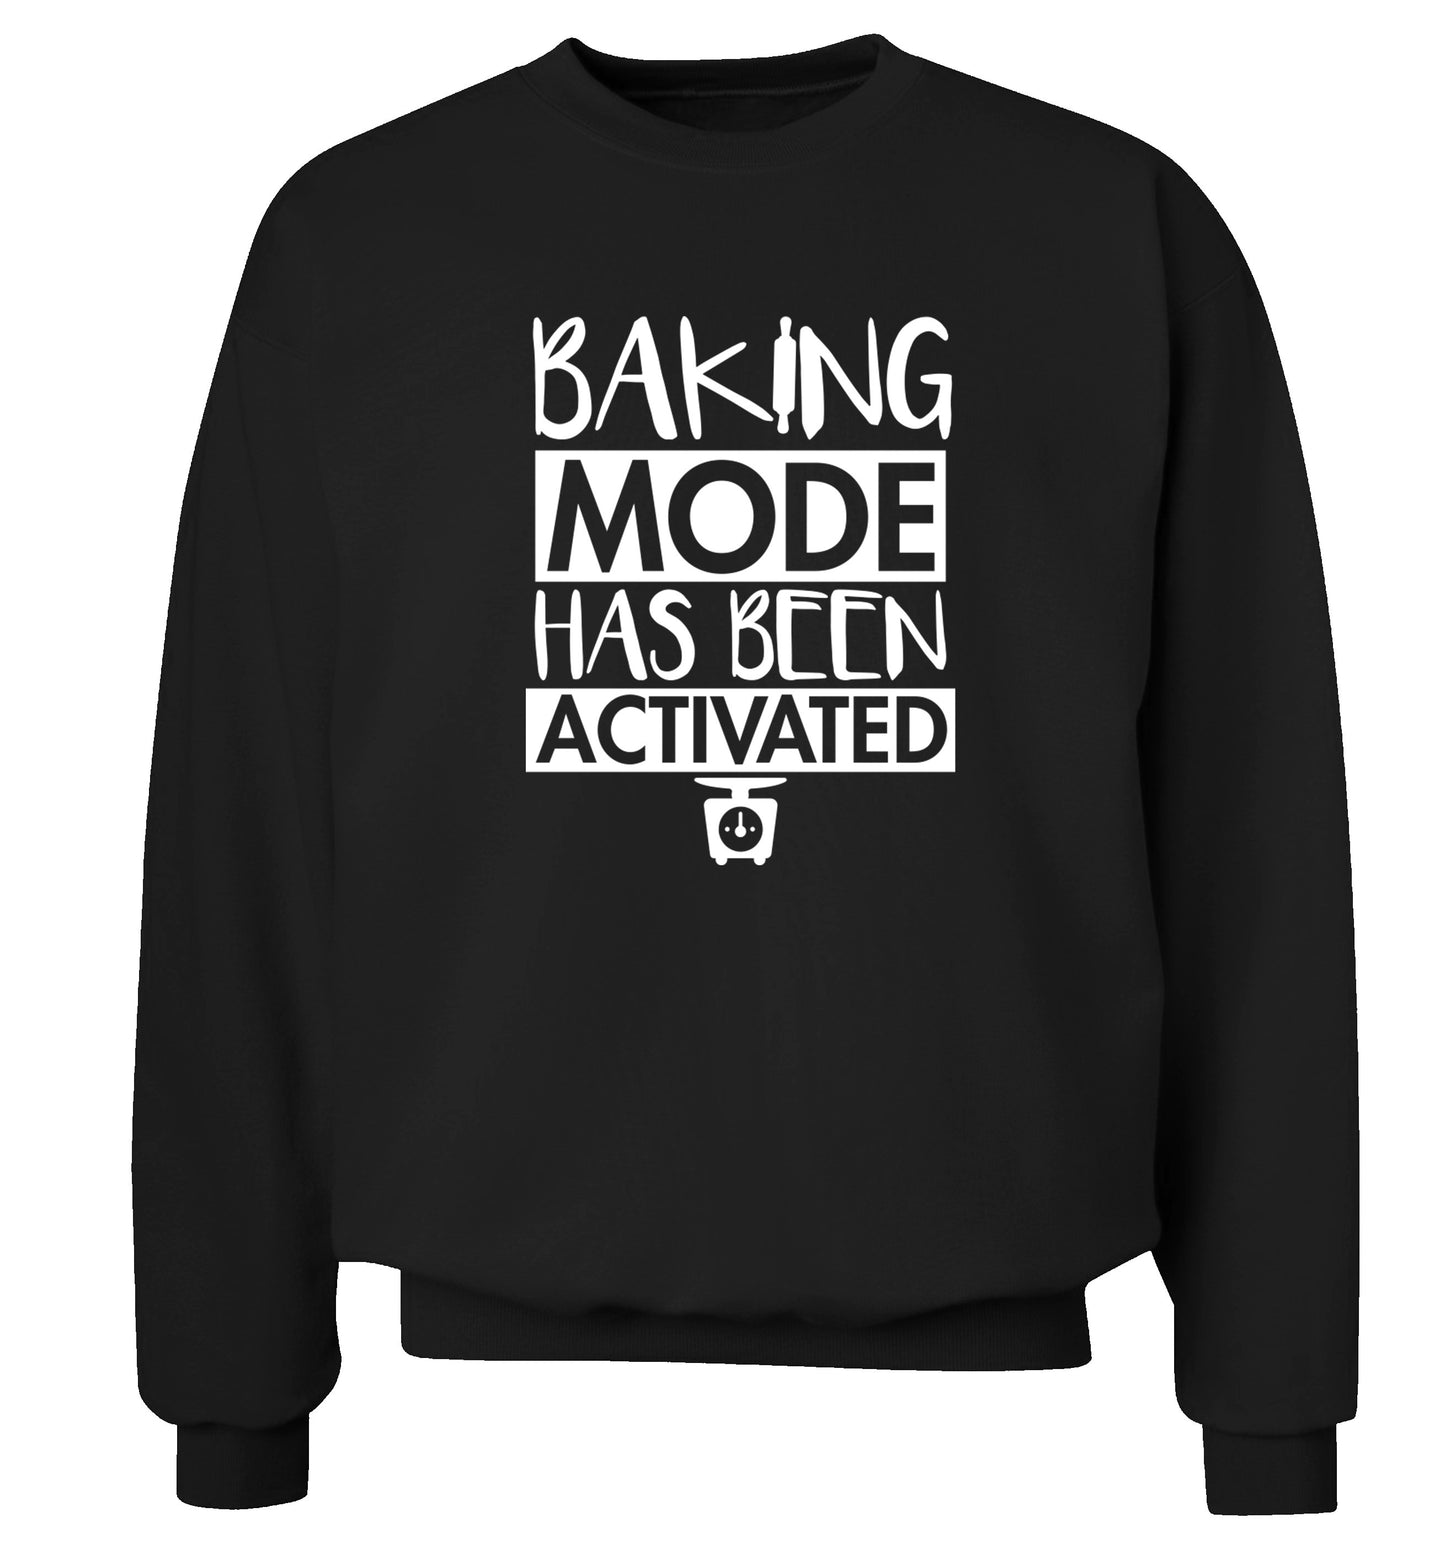 Baking mode has been activated Adult's unisex black Sweater 2XL